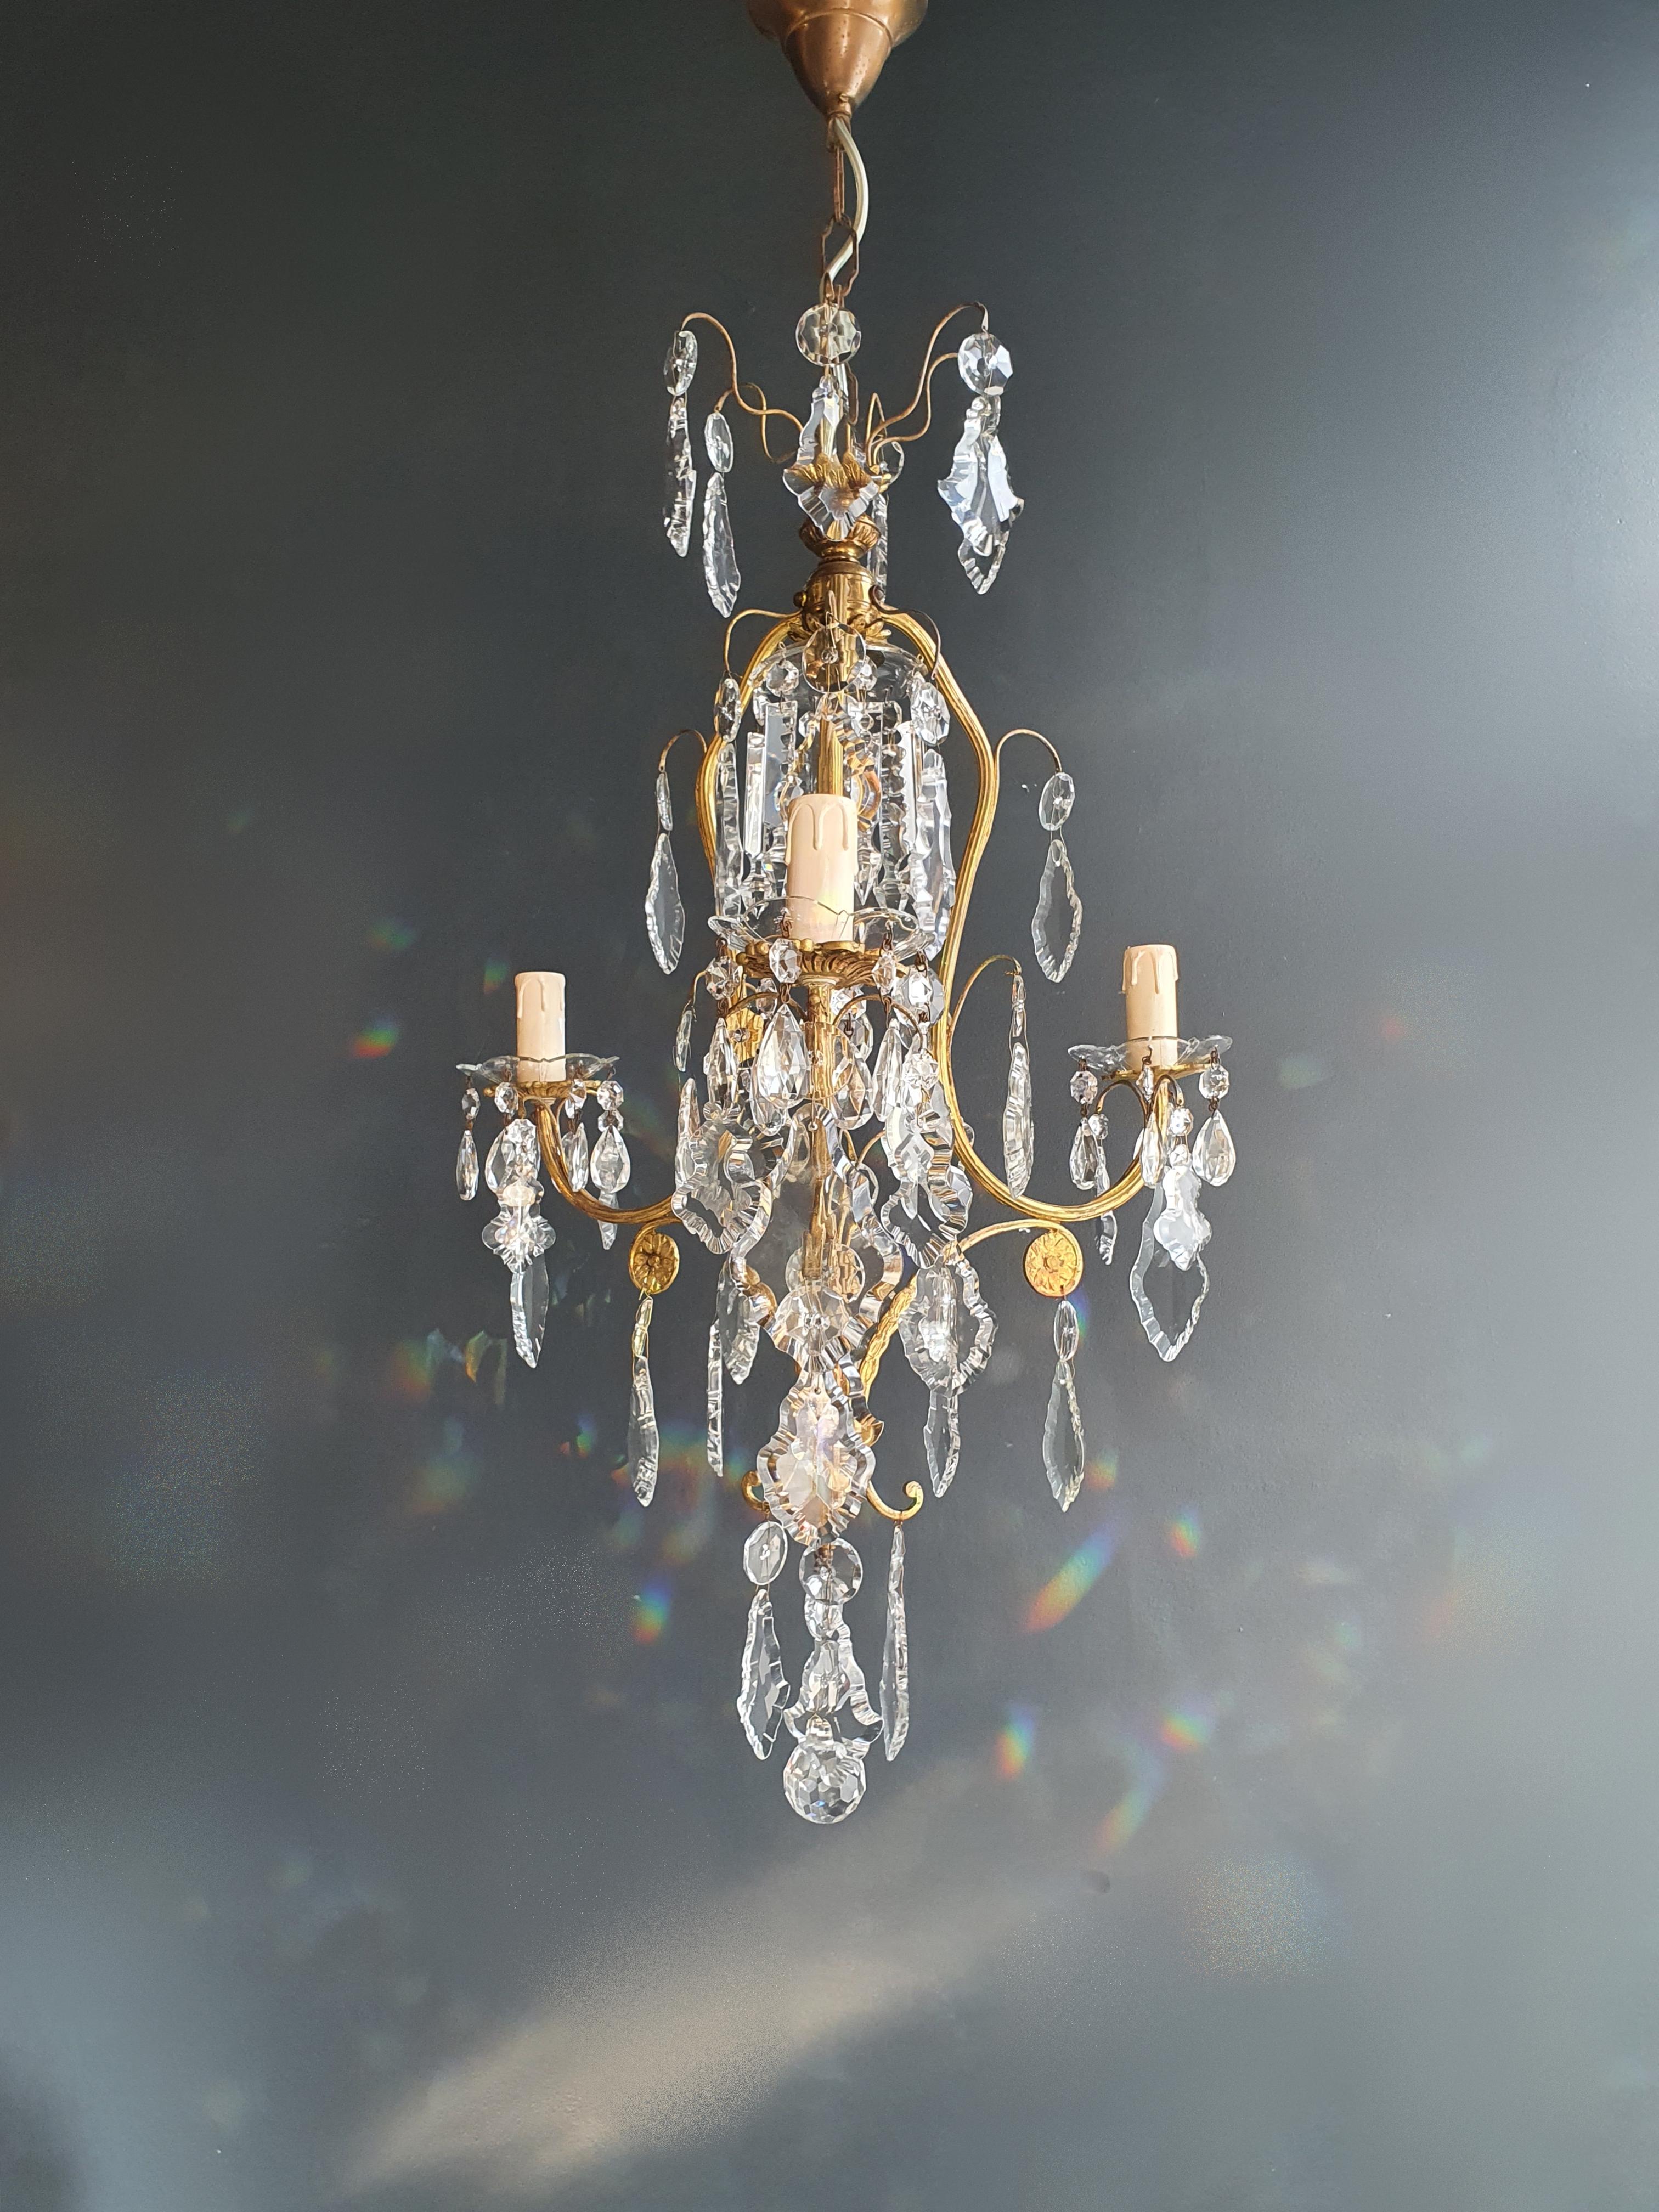 Antique Chandelier: Lovingly Restored in Berlin, Exuding Elegance

Step into a realm of timeless beauty with this chandelier, meticulously restored in Berlin with unwavering care and expertise. Balancing vintage charm and contemporary practicality,